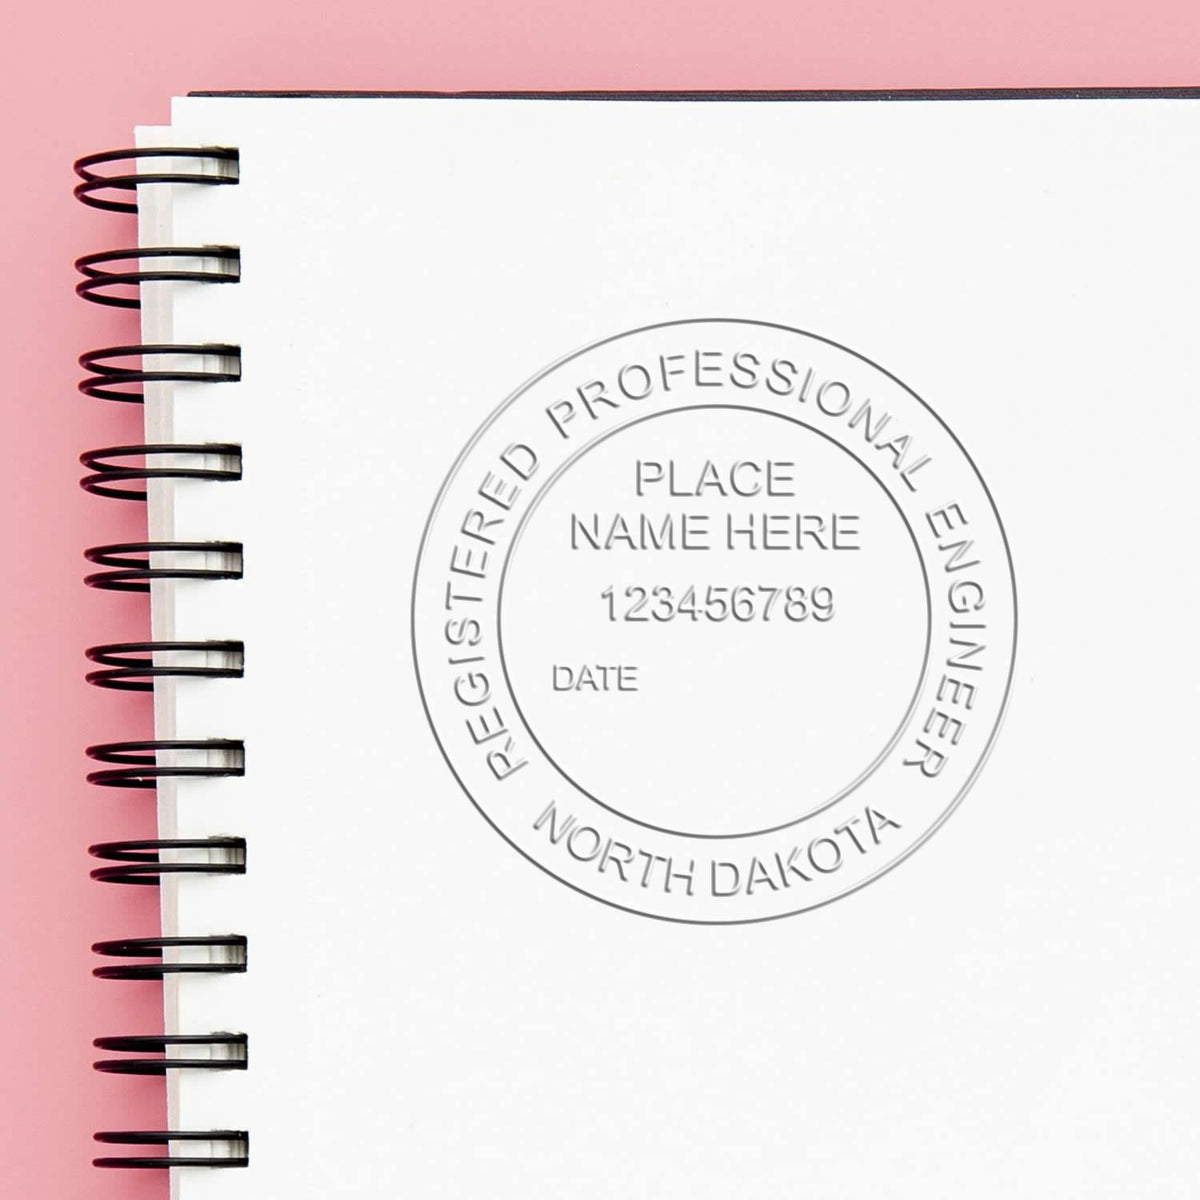 An alternative view of the State of North Dakota Extended Long Reach Engineer Seal stamped on a sheet of paper showing the image in use